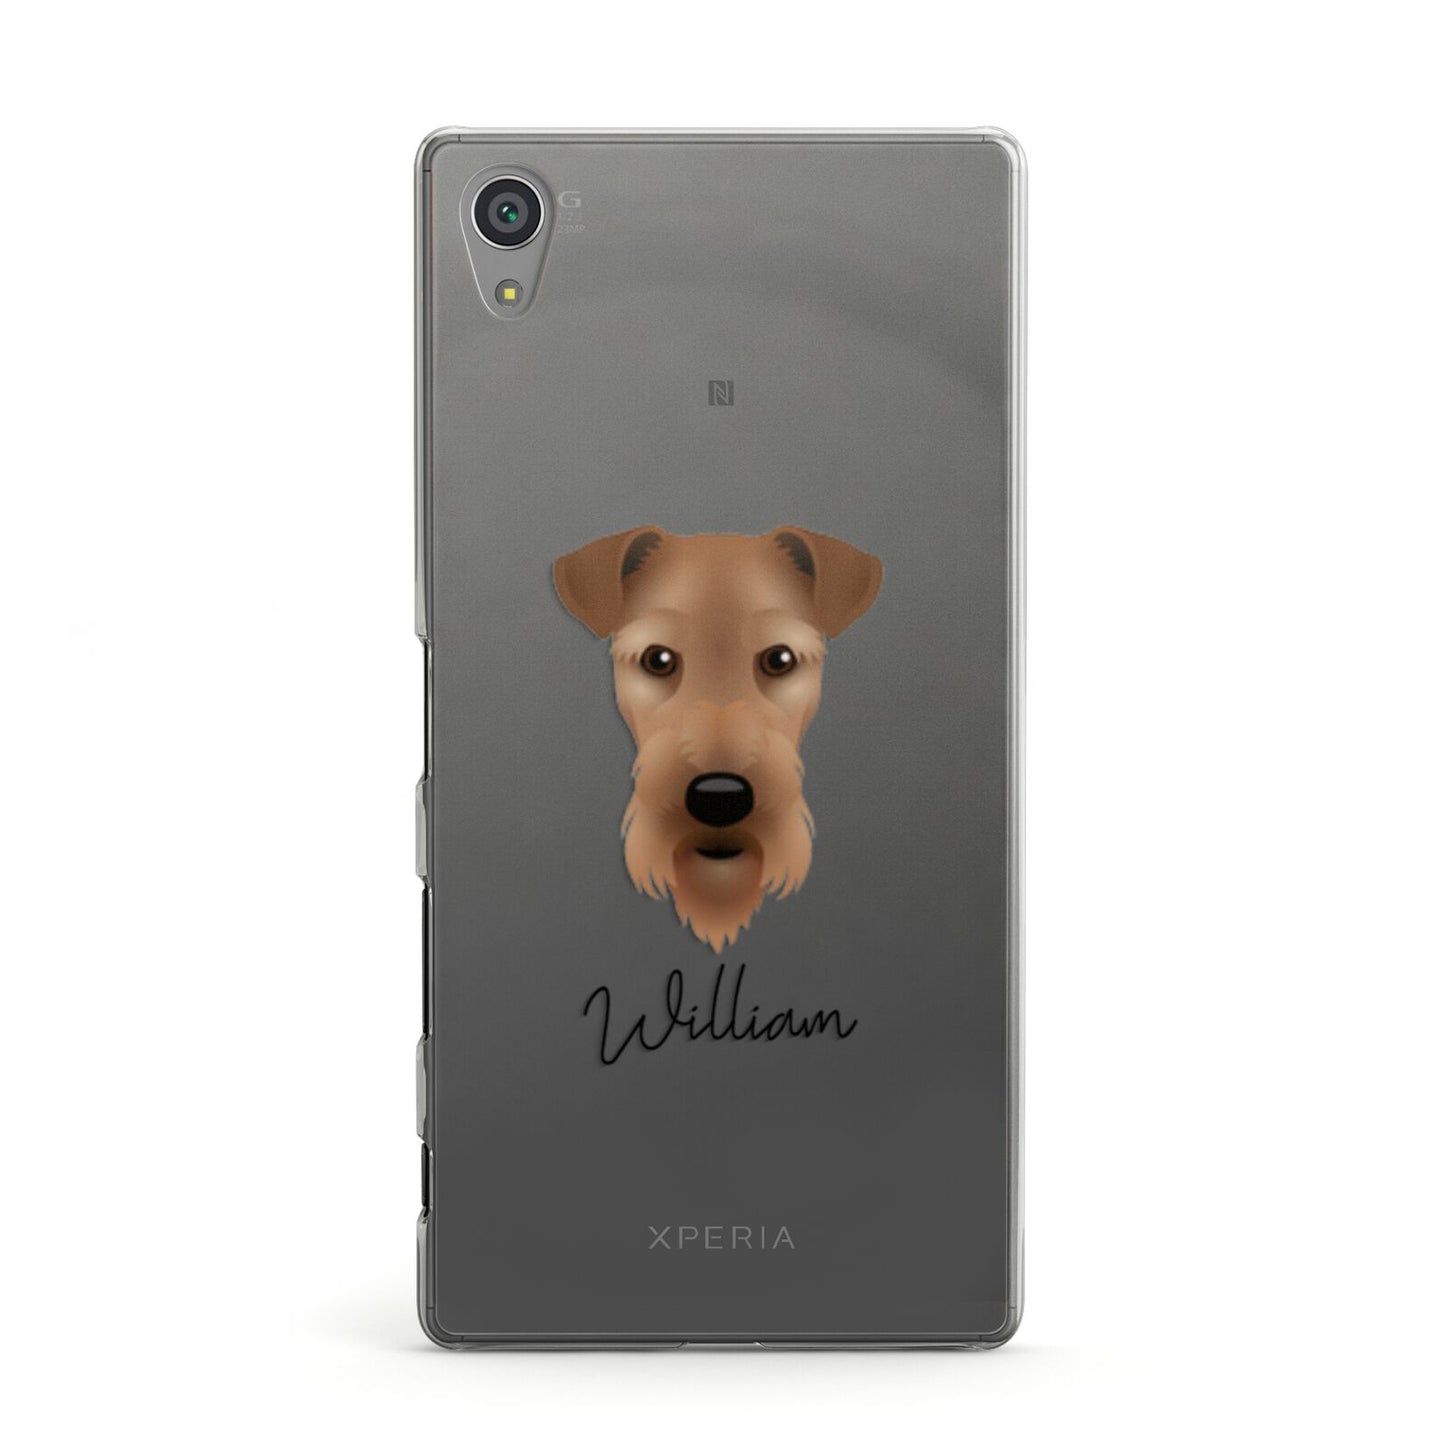 Airedale Terrier Personalised Sony Xperia Case